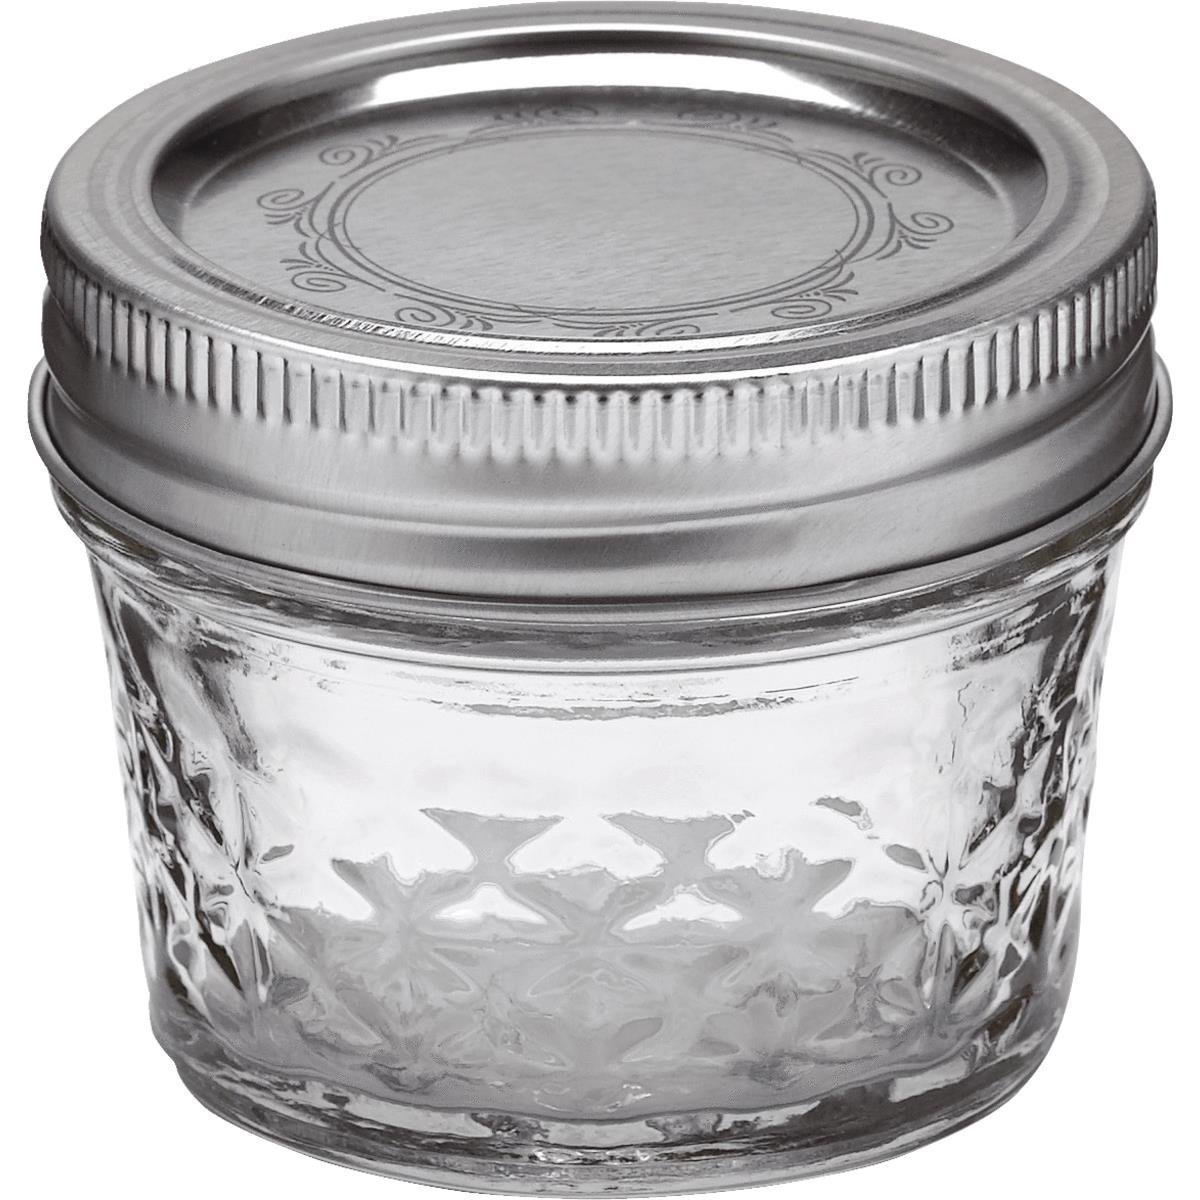 Ball Regular Mouth 4oz Quilted Pint Mason Jars, 12 Count - image 5 of 11